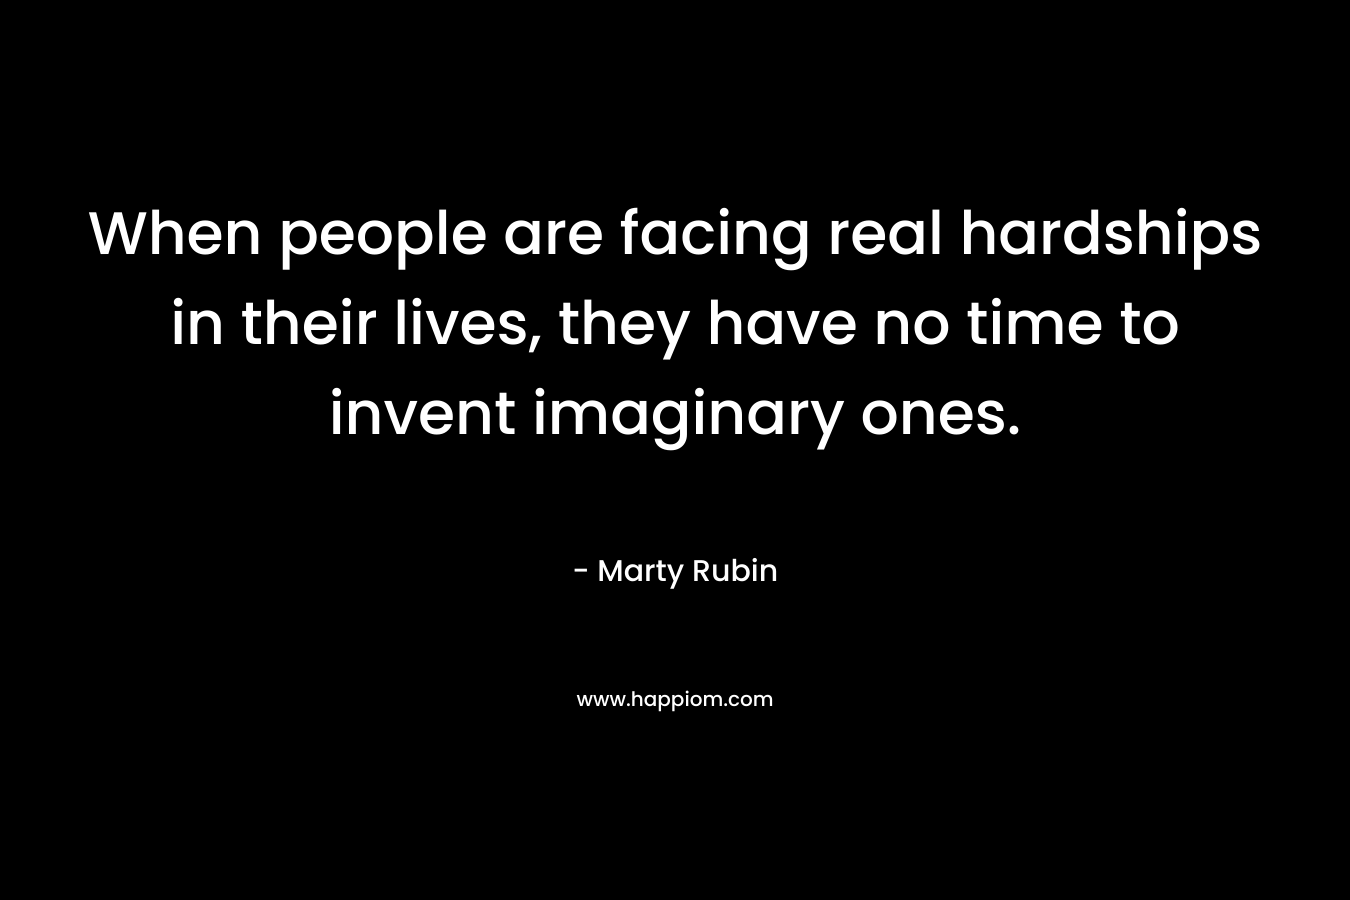 When people are facing real hardships in their lives, they have no time to invent imaginary ones. – Marty Rubin